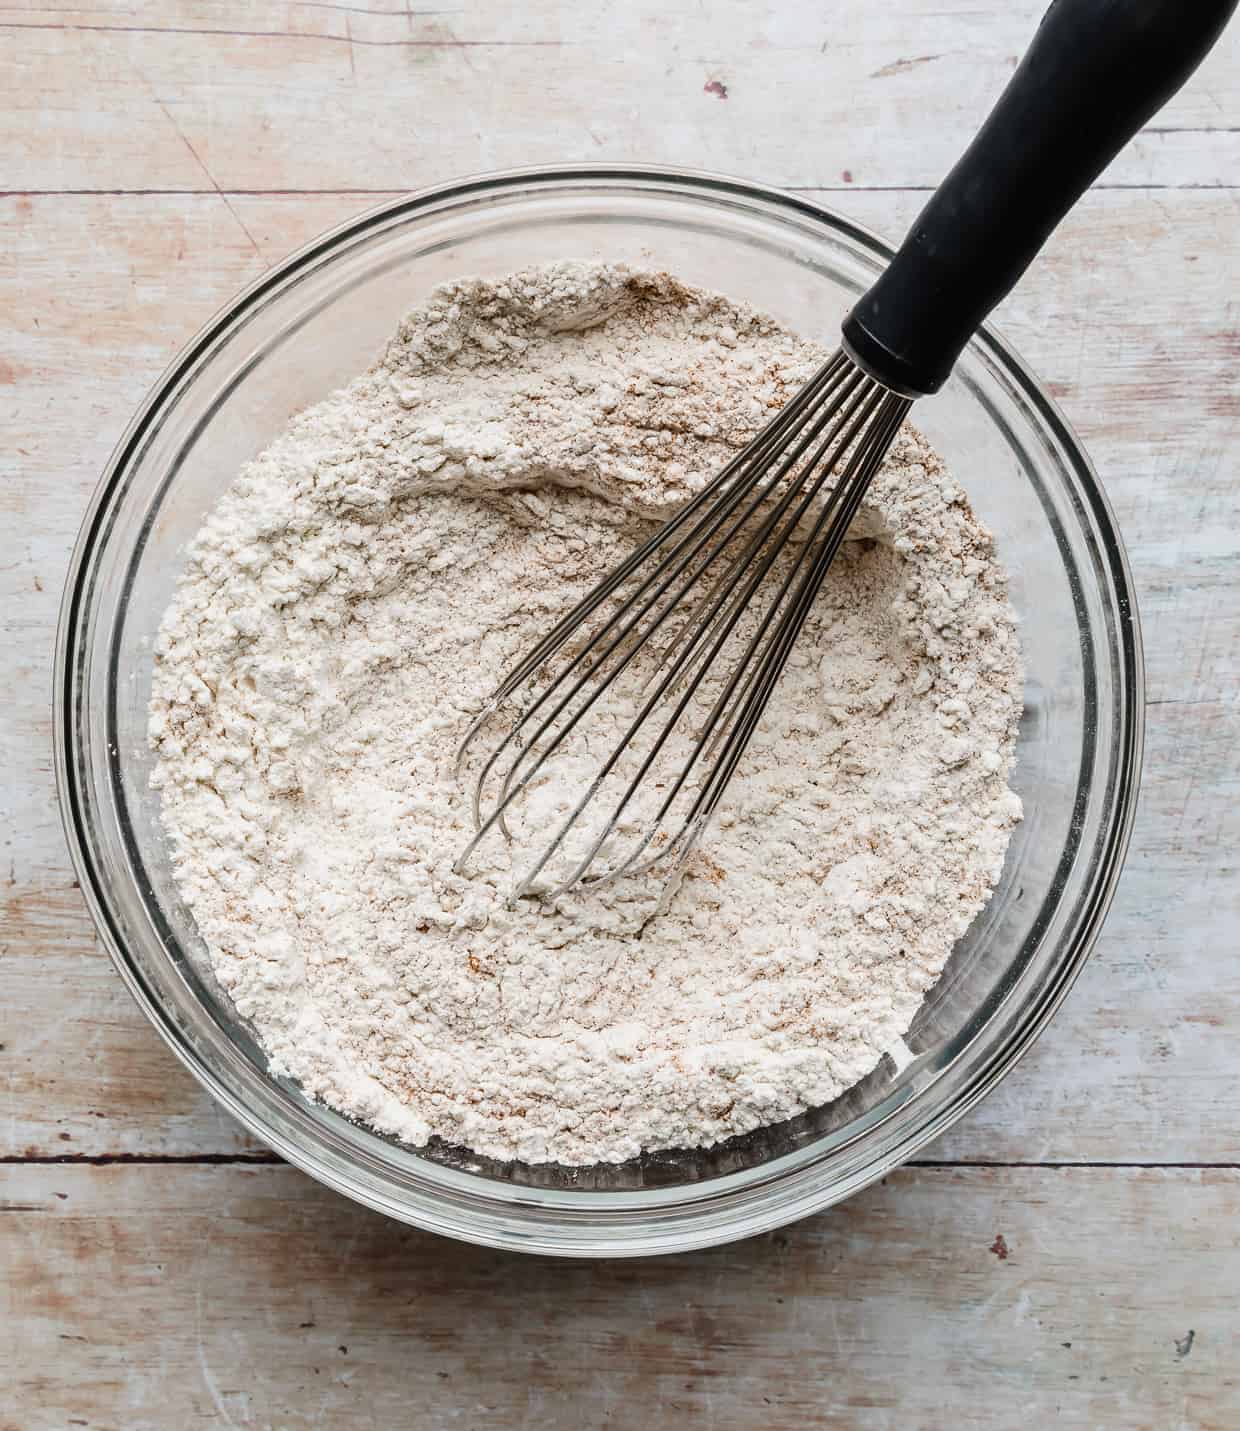 A whisk stirring flour and dry ingredients.